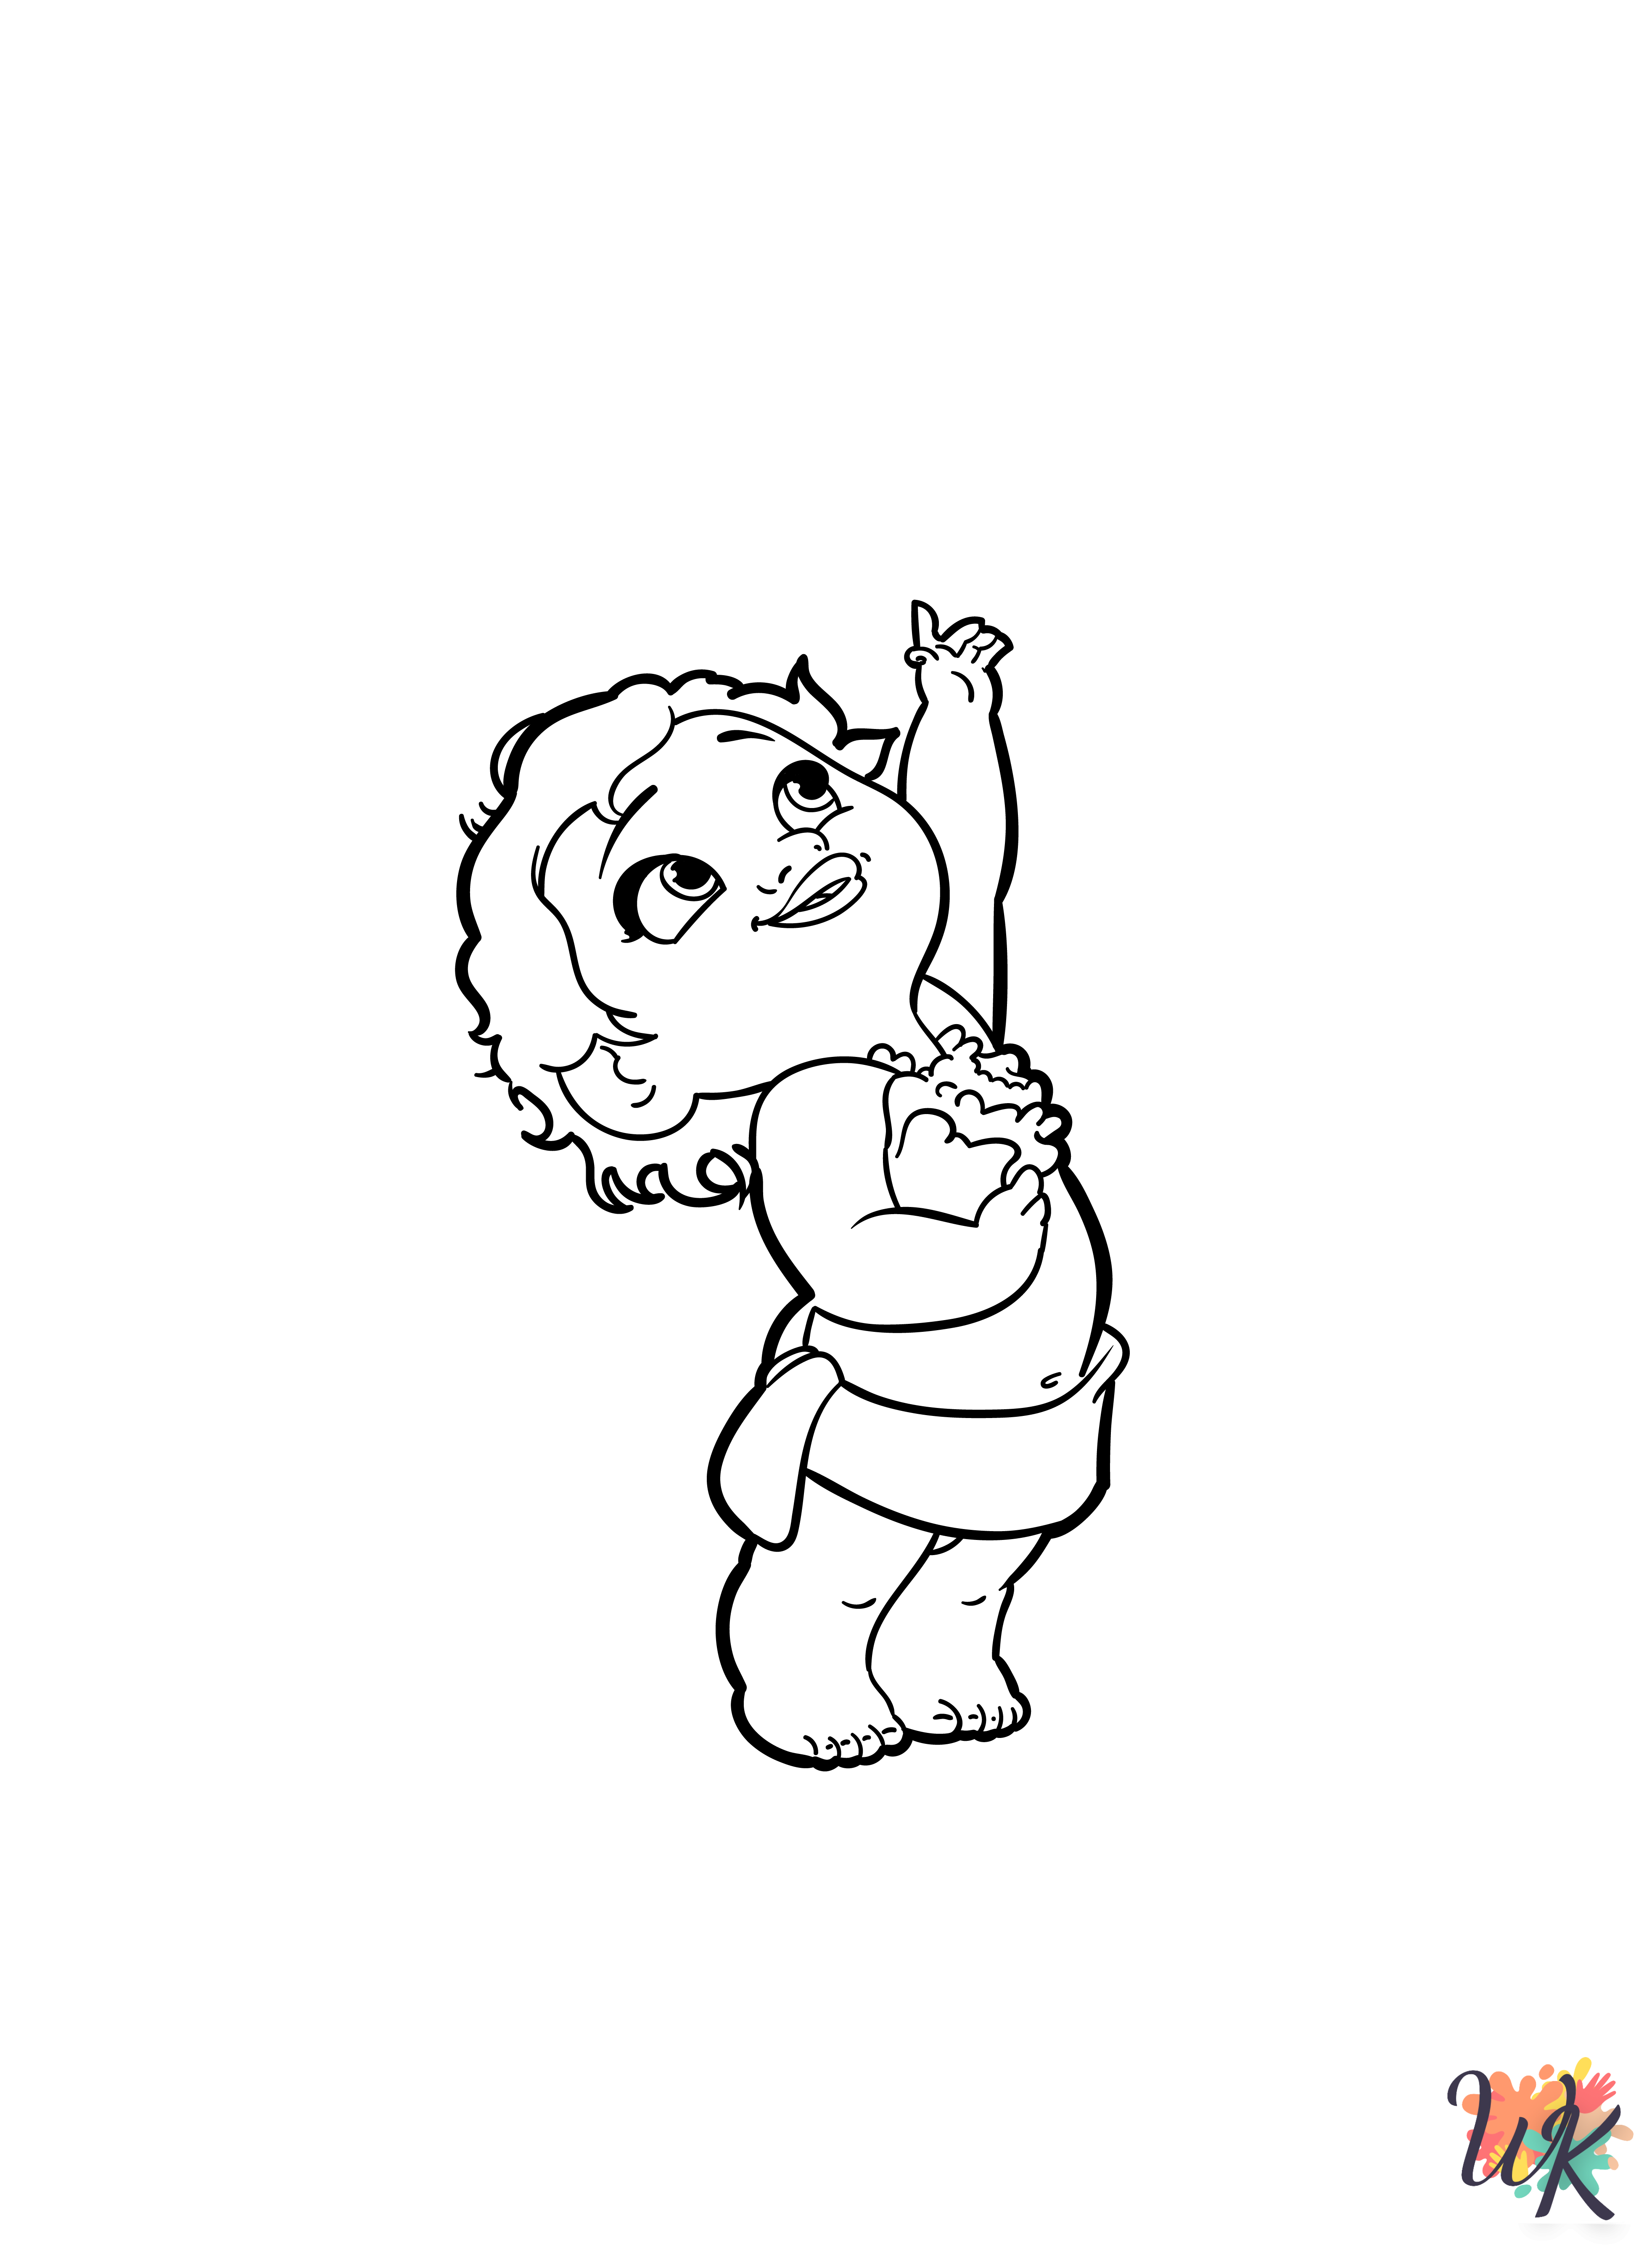 Moana coloring pages for preschoolers